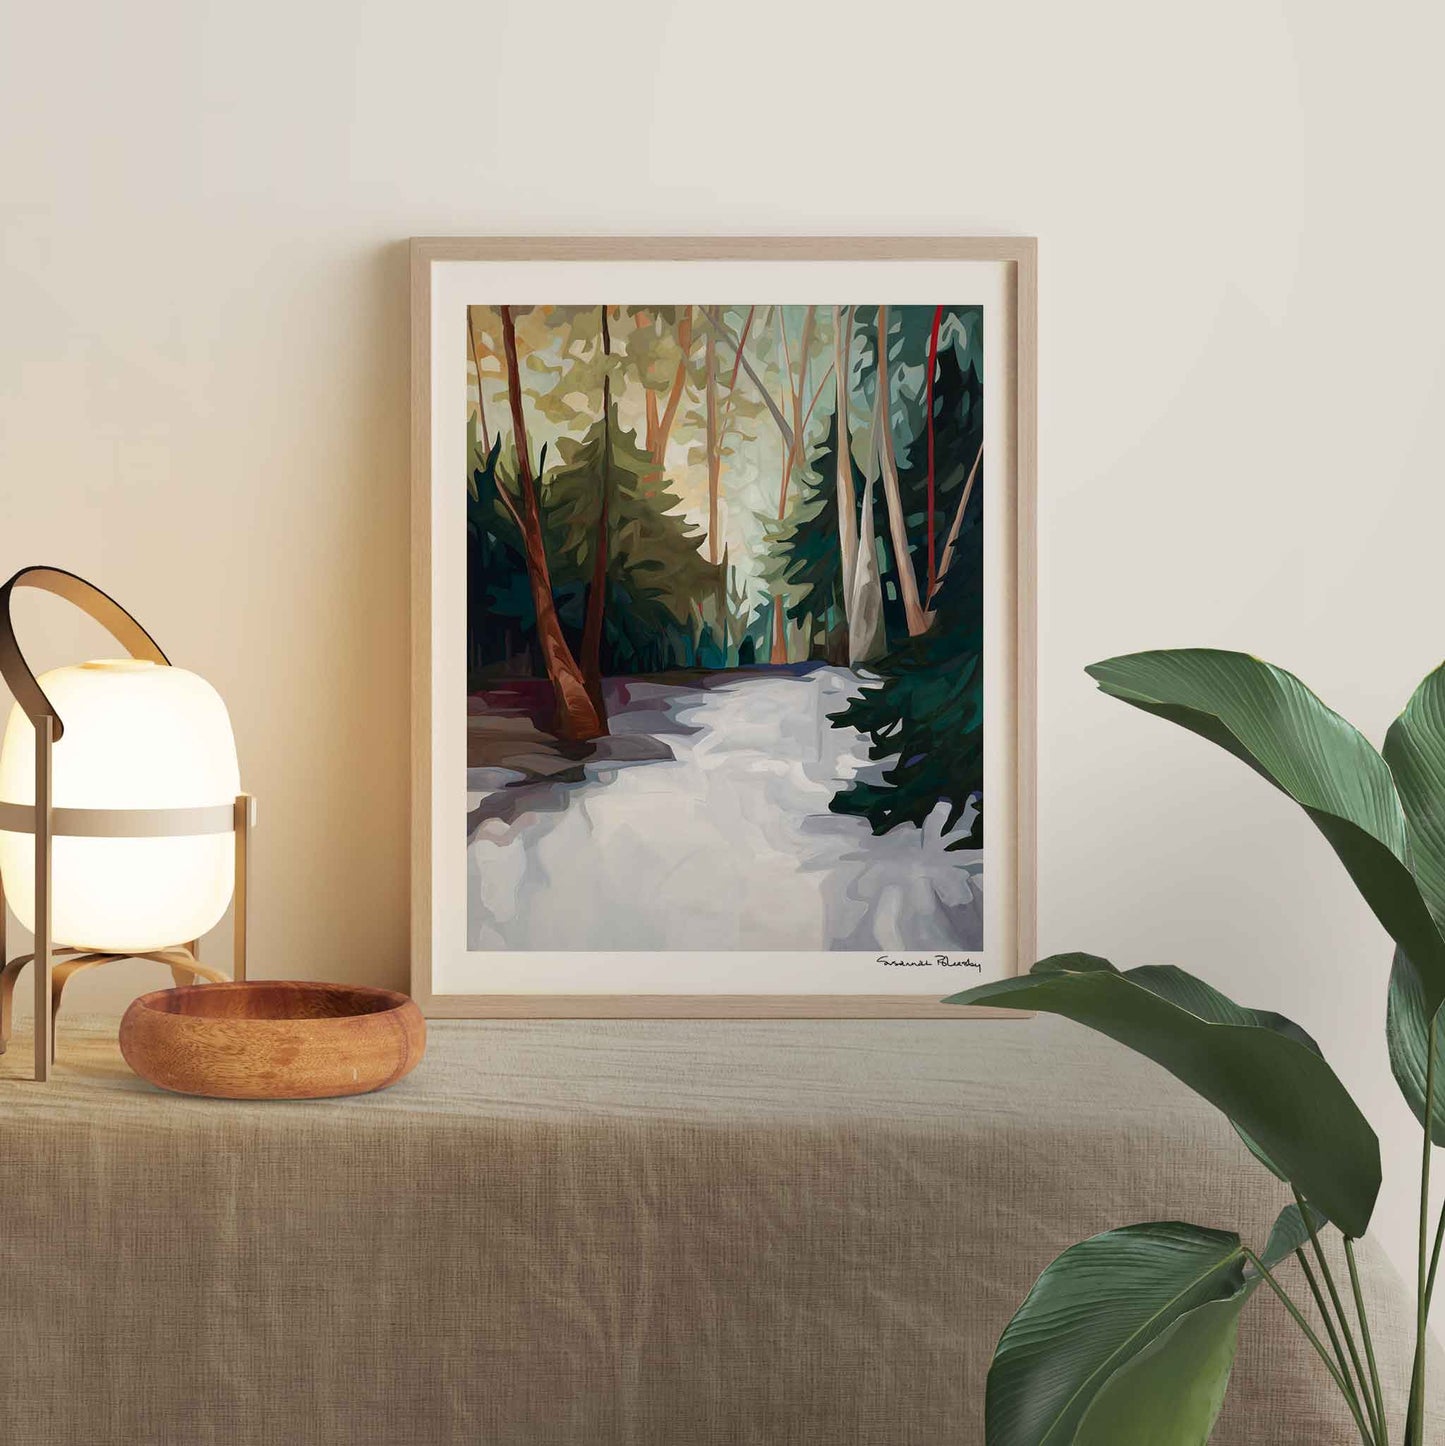 Art print of 'Rockwood' created from an abstract forest painting by Canadian artist Susannah Bleasby